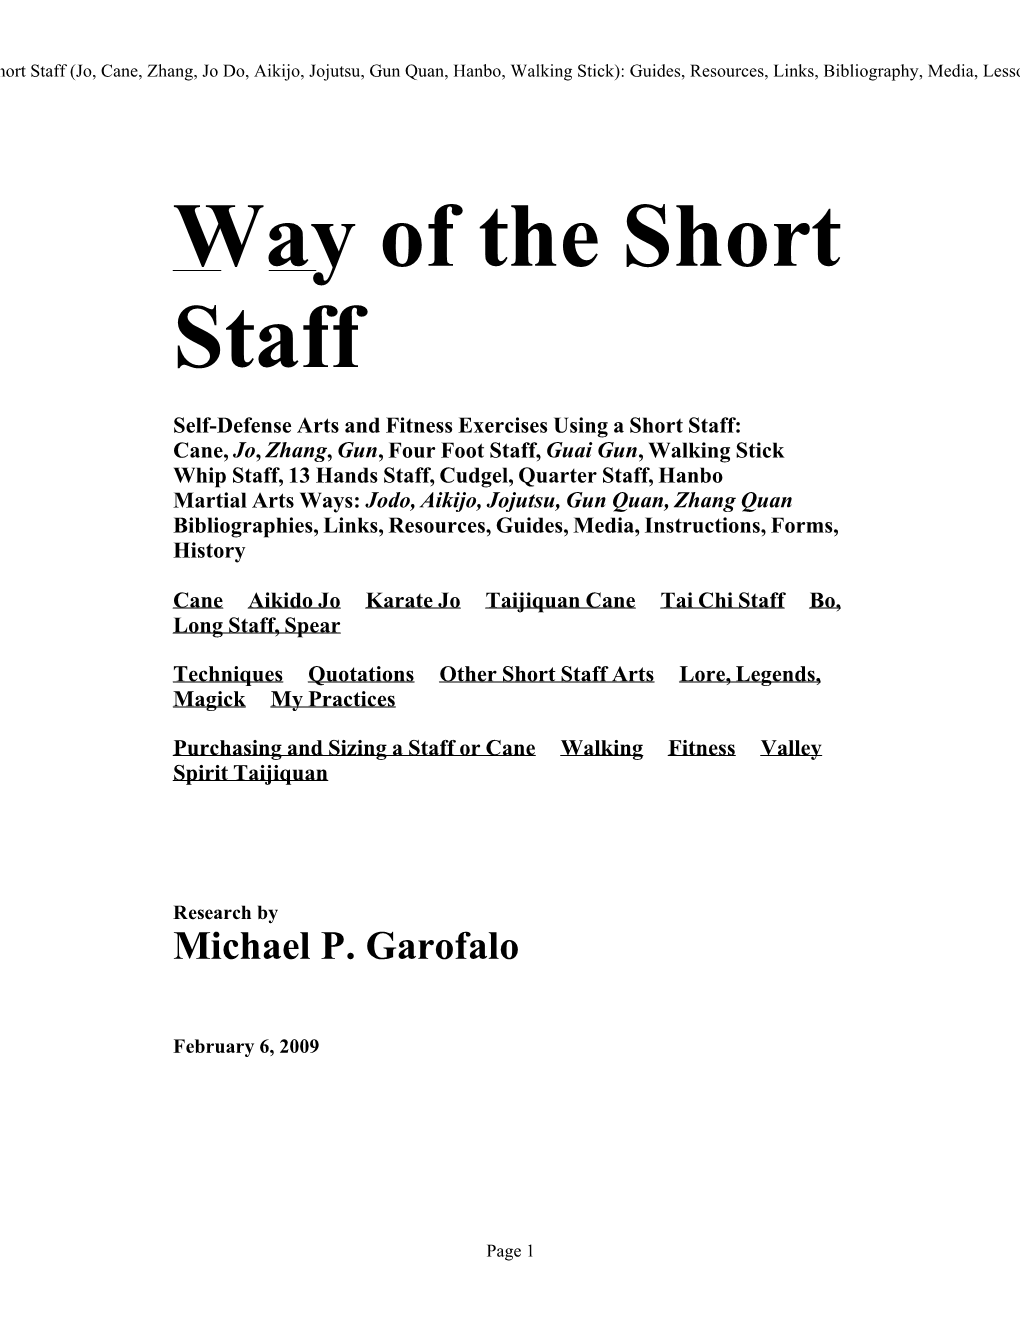 Short Staff Weapons